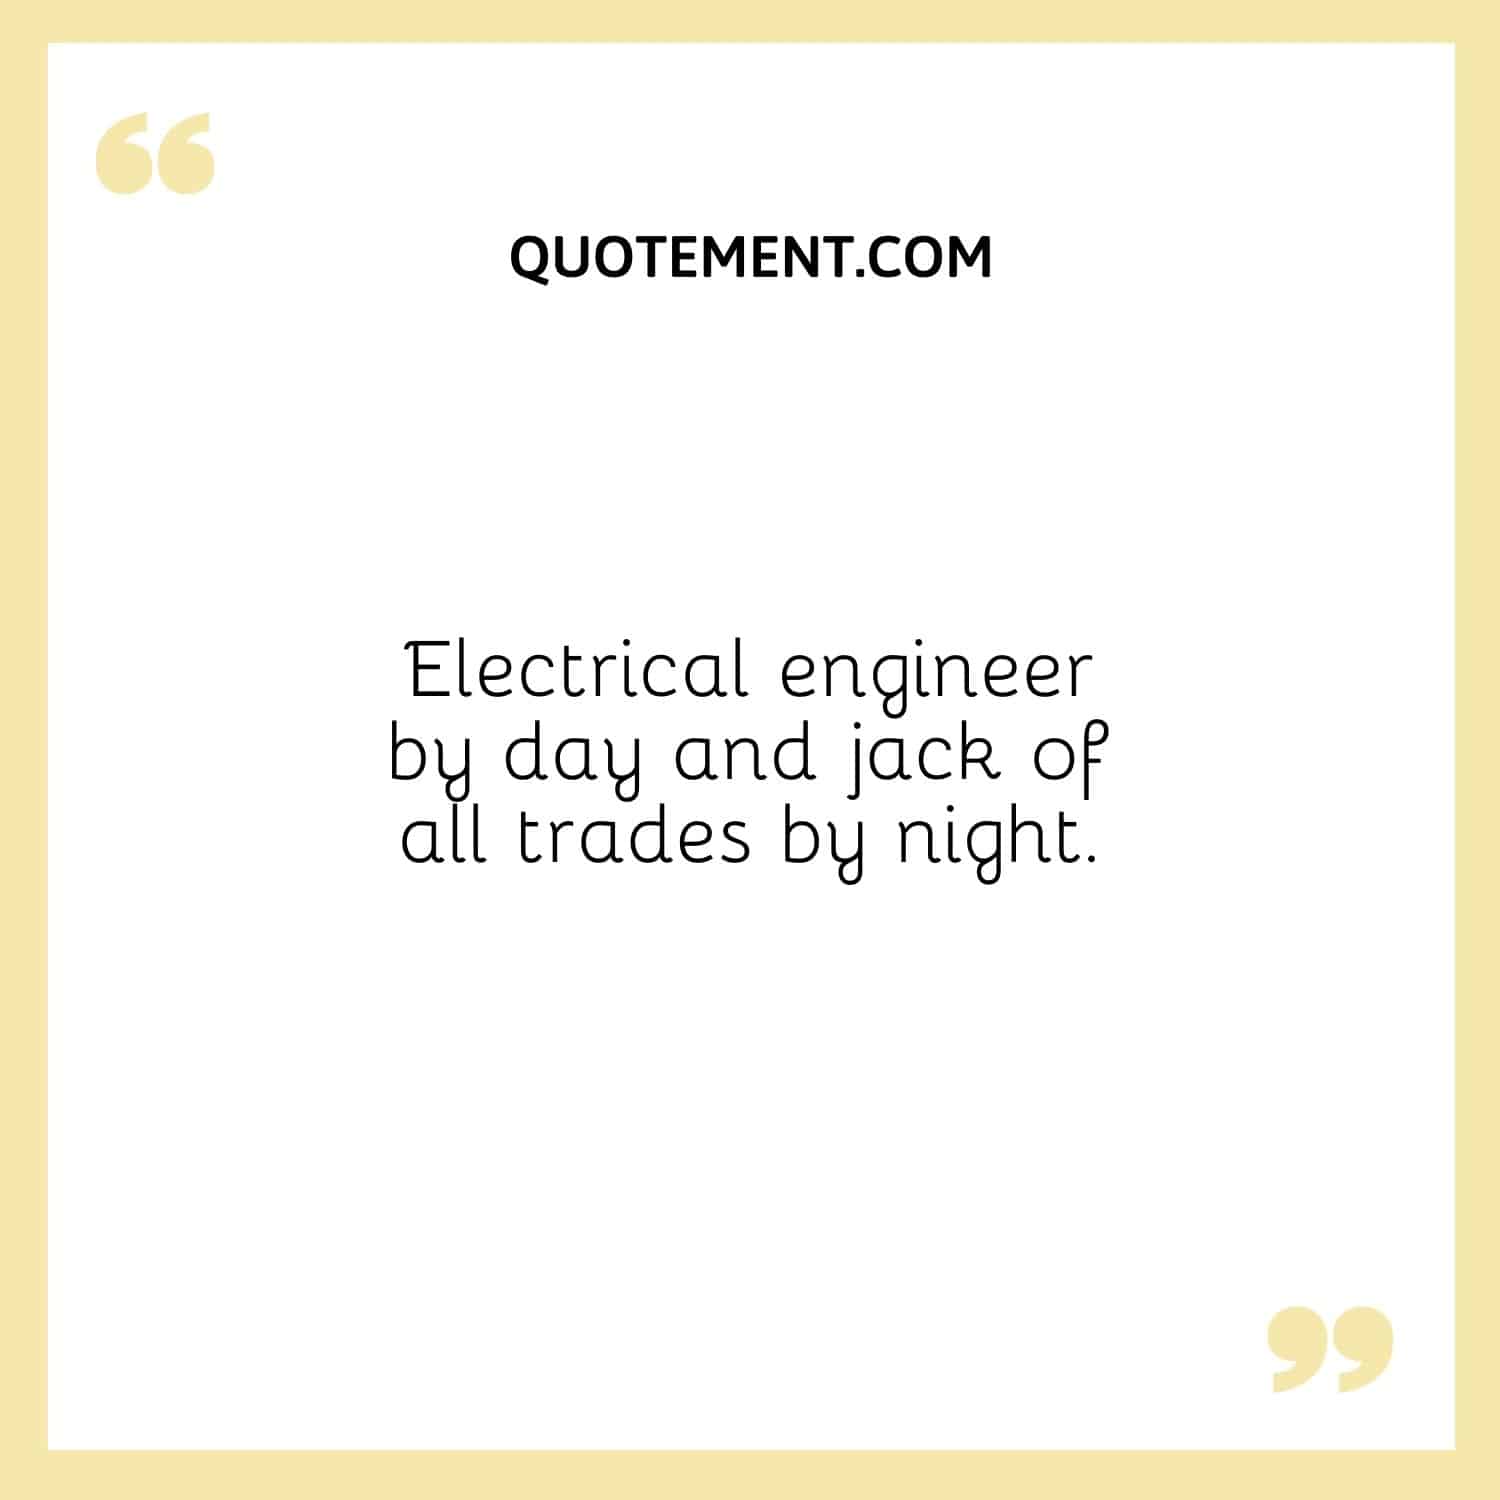 Electrical engineer by day and jack of all trades by night.20 - Electrical Engineer Bio For Instagra